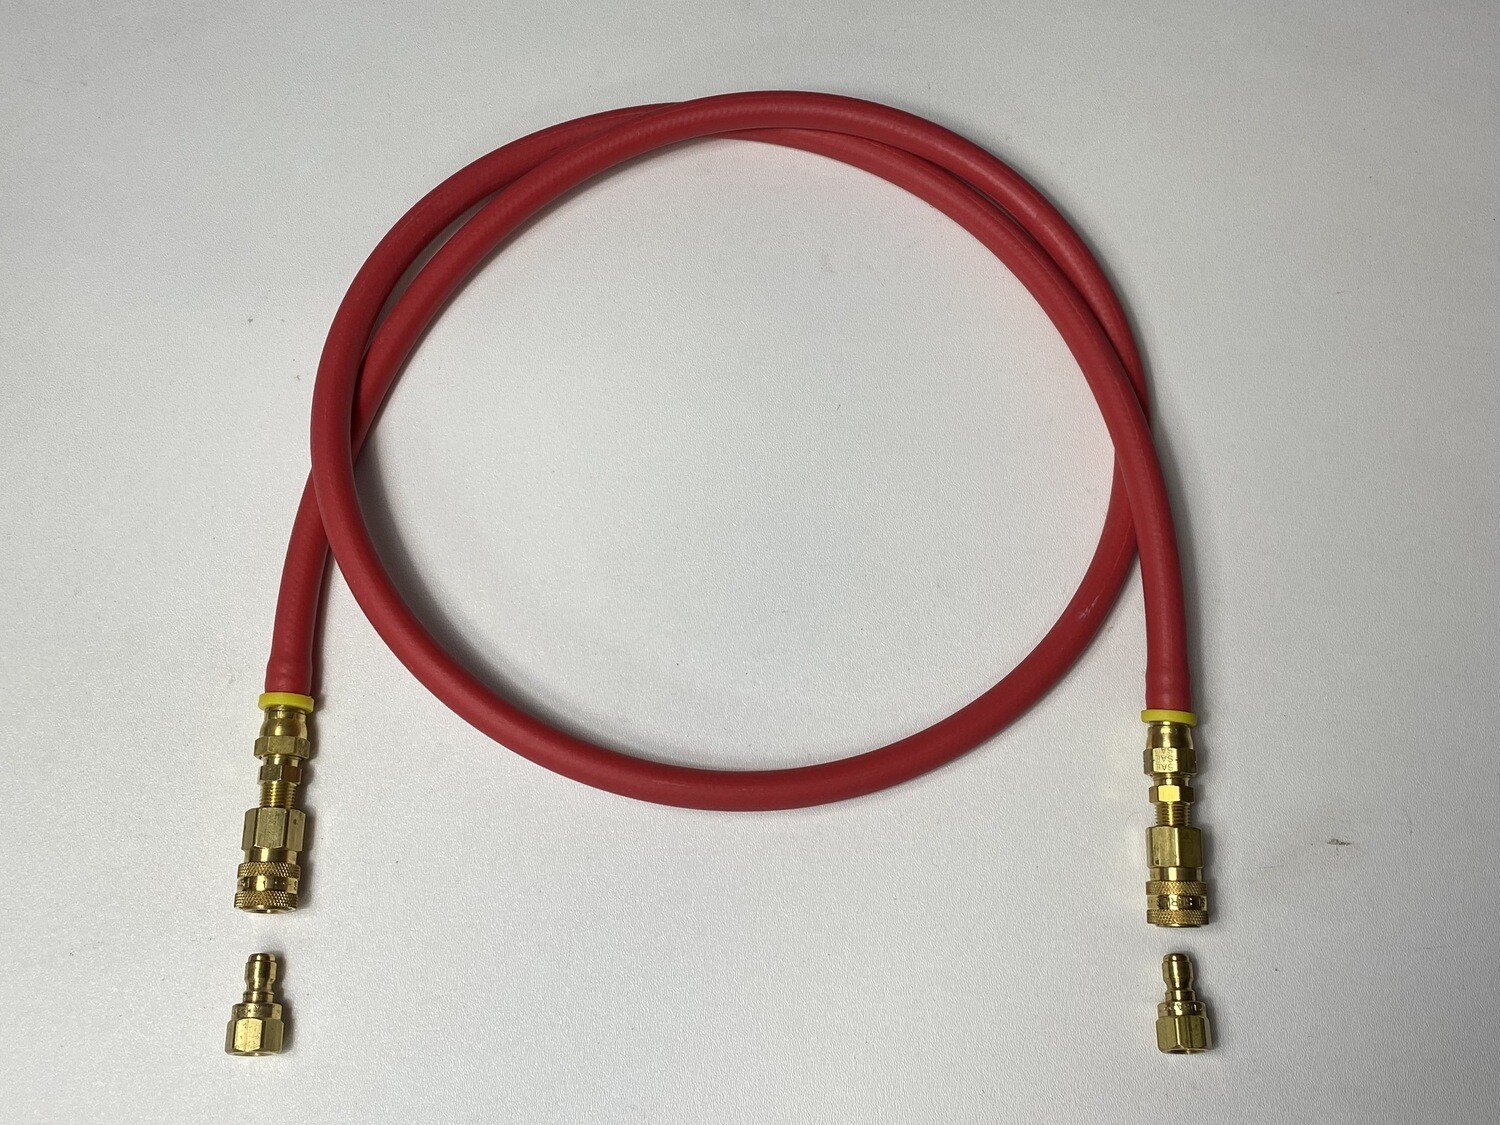 LPG Propane hose with Quick connects